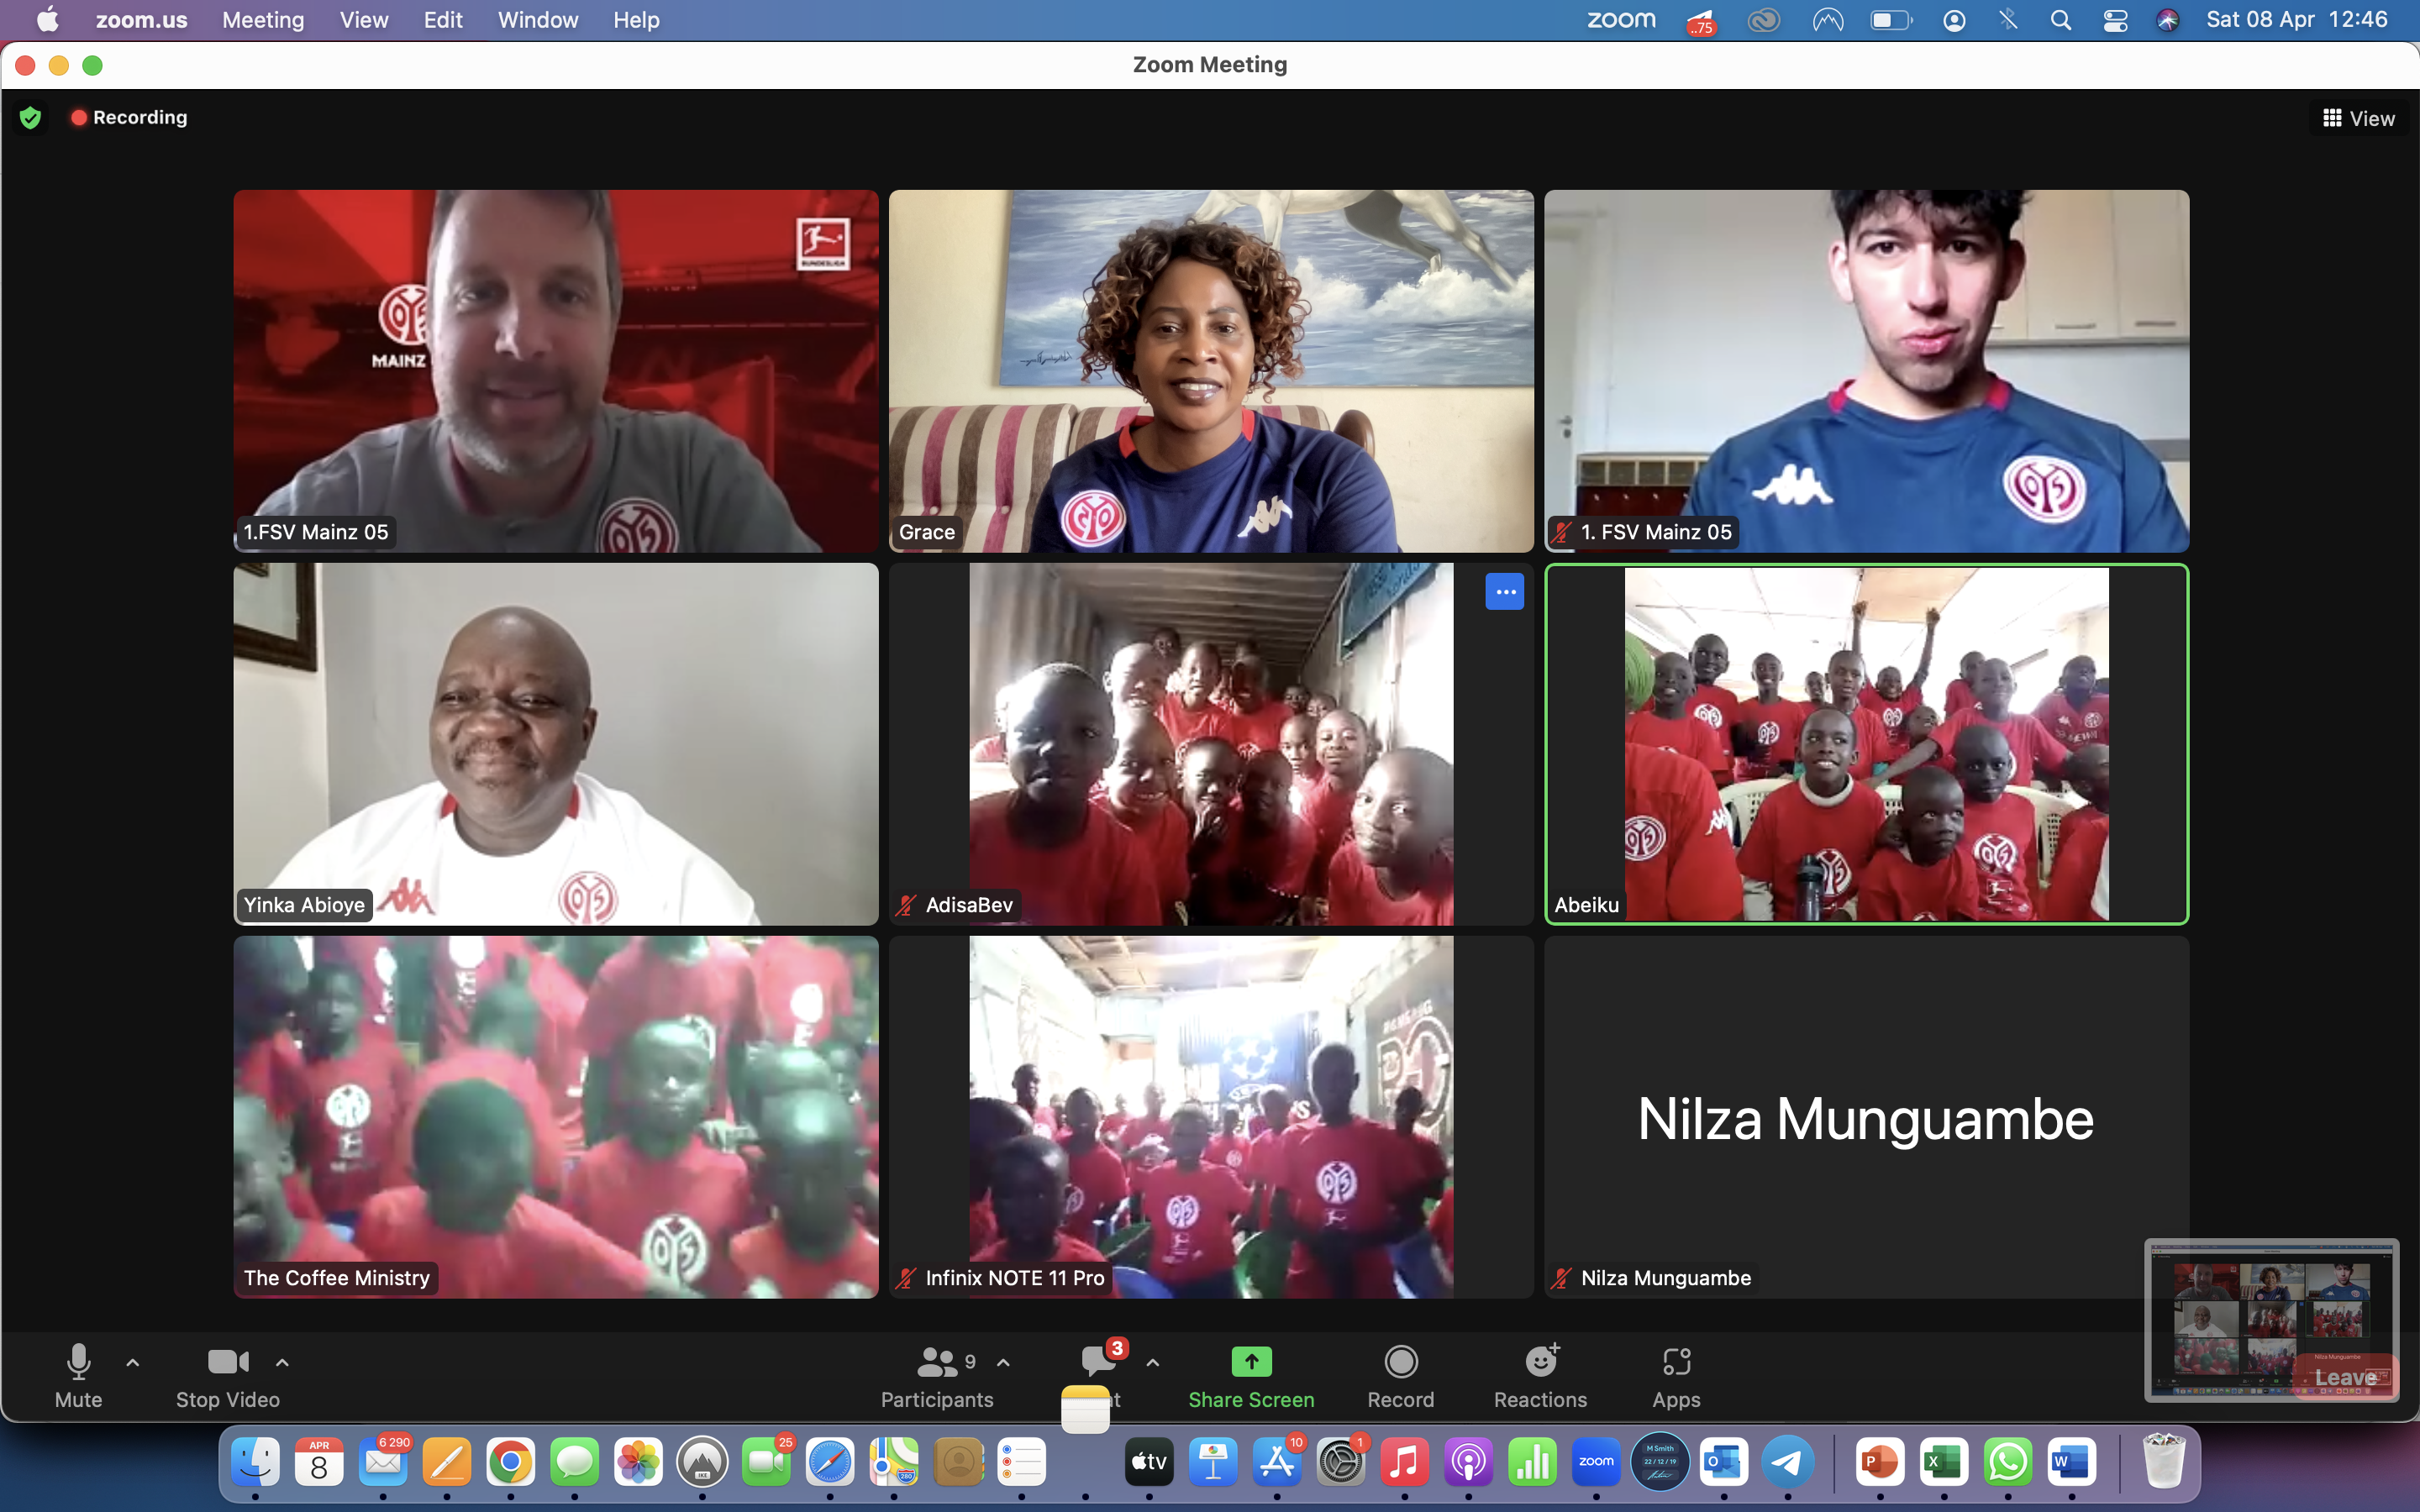 Kenyas First Virtual Football Training Launched with 120 kids and 20 Coaches